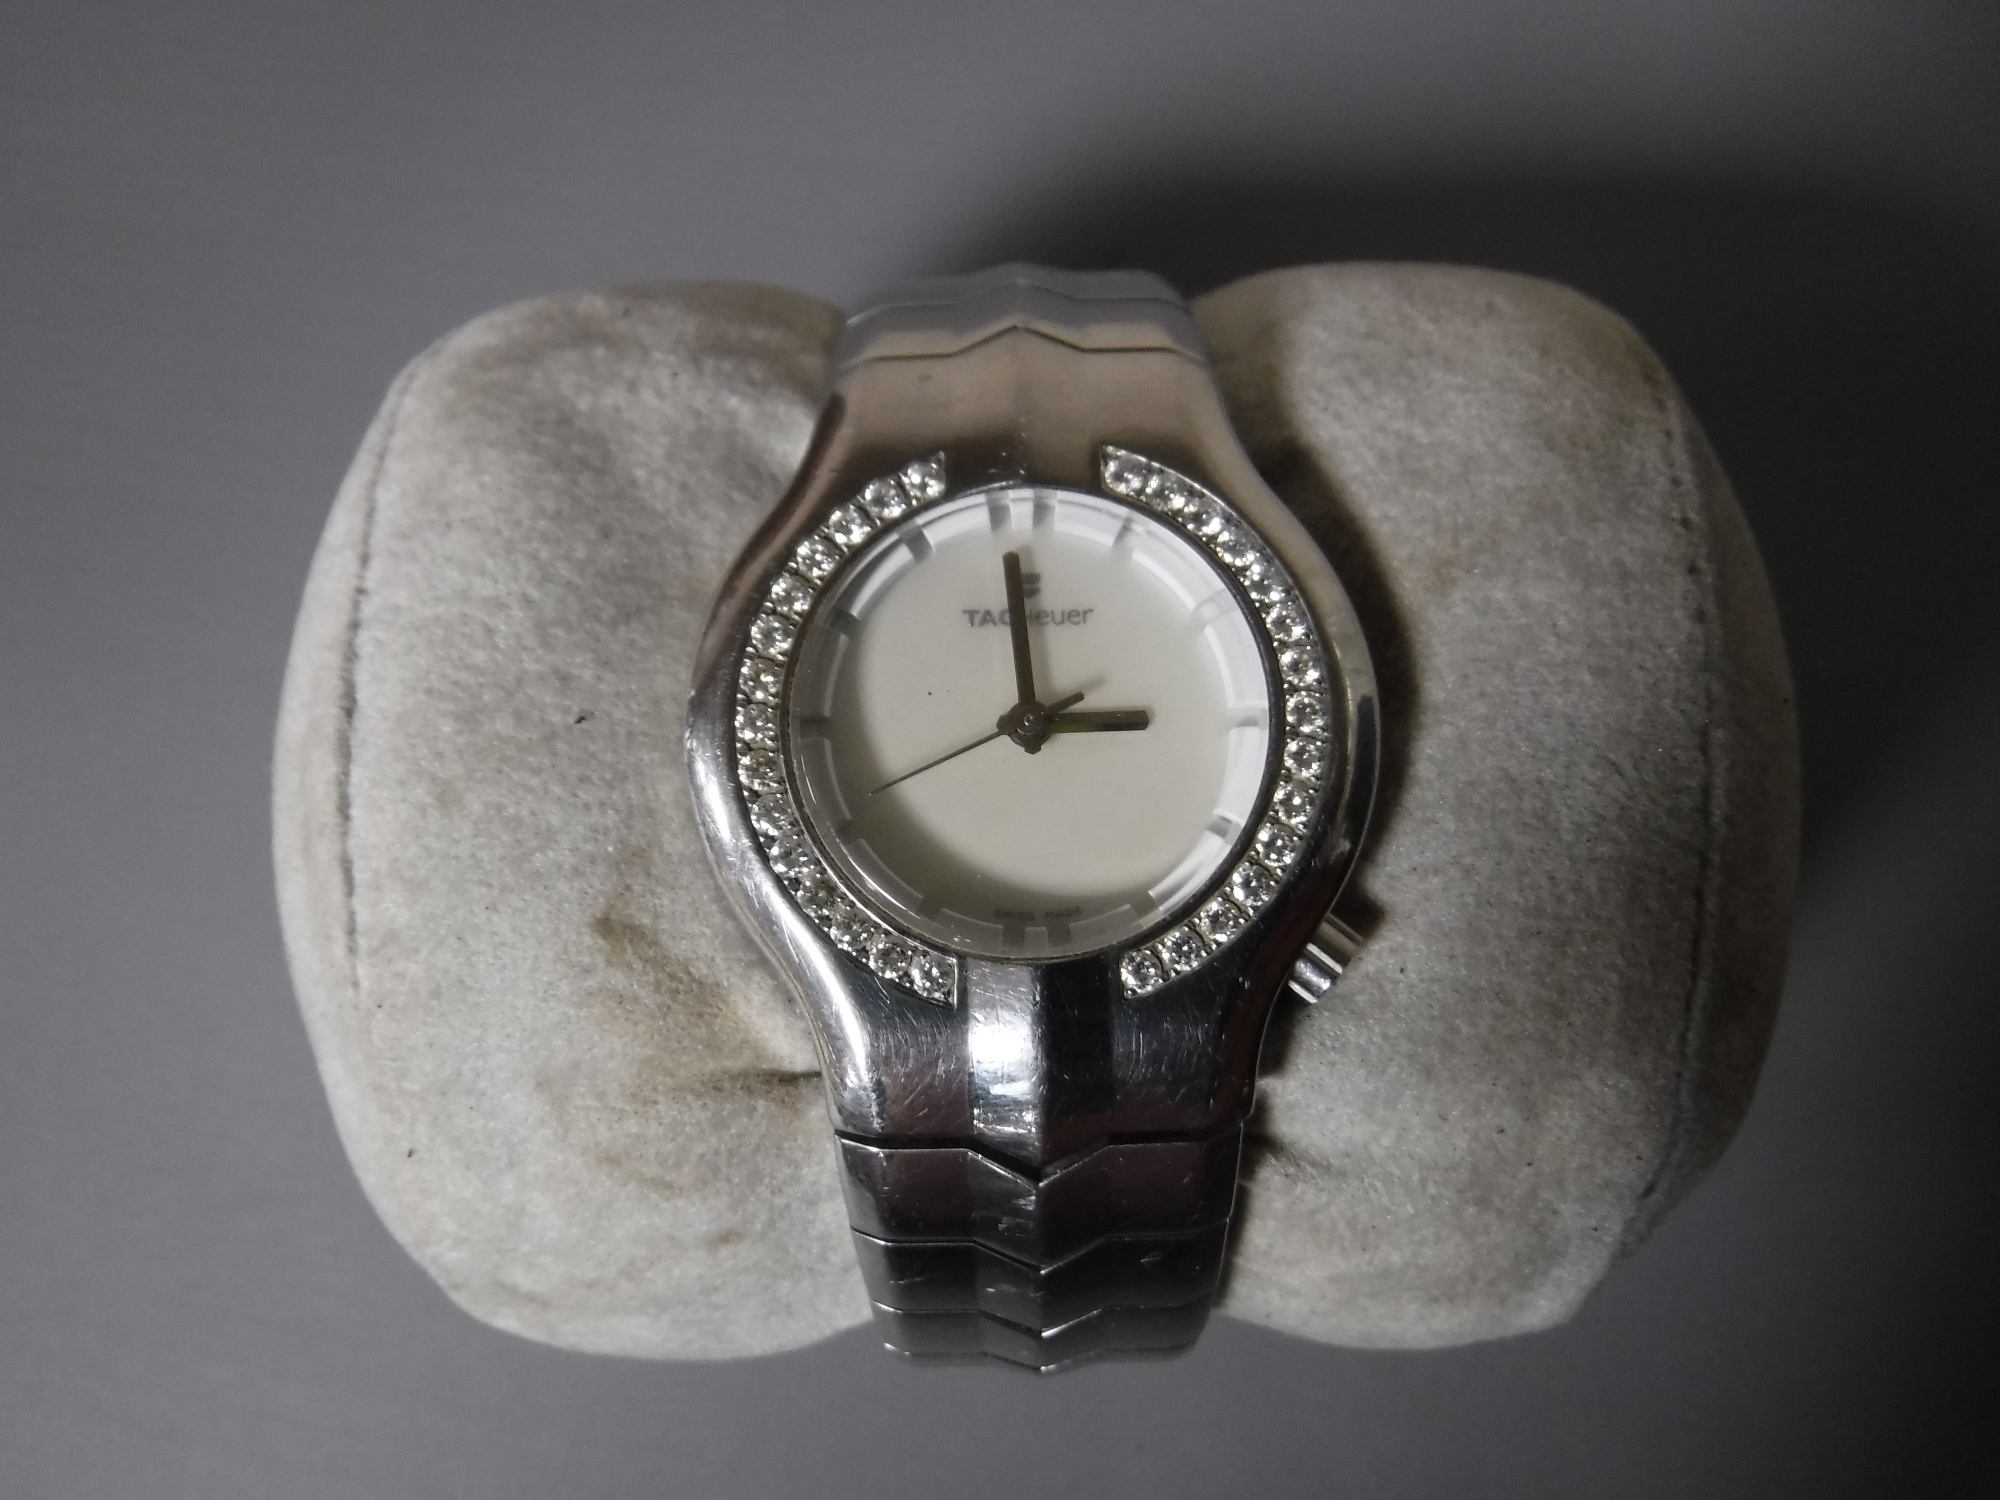 A Lady's stainless-steel wristwatch, signed Tag Heuer, model WP1317 Alter Ego, quartz movement, - Image 2 of 2